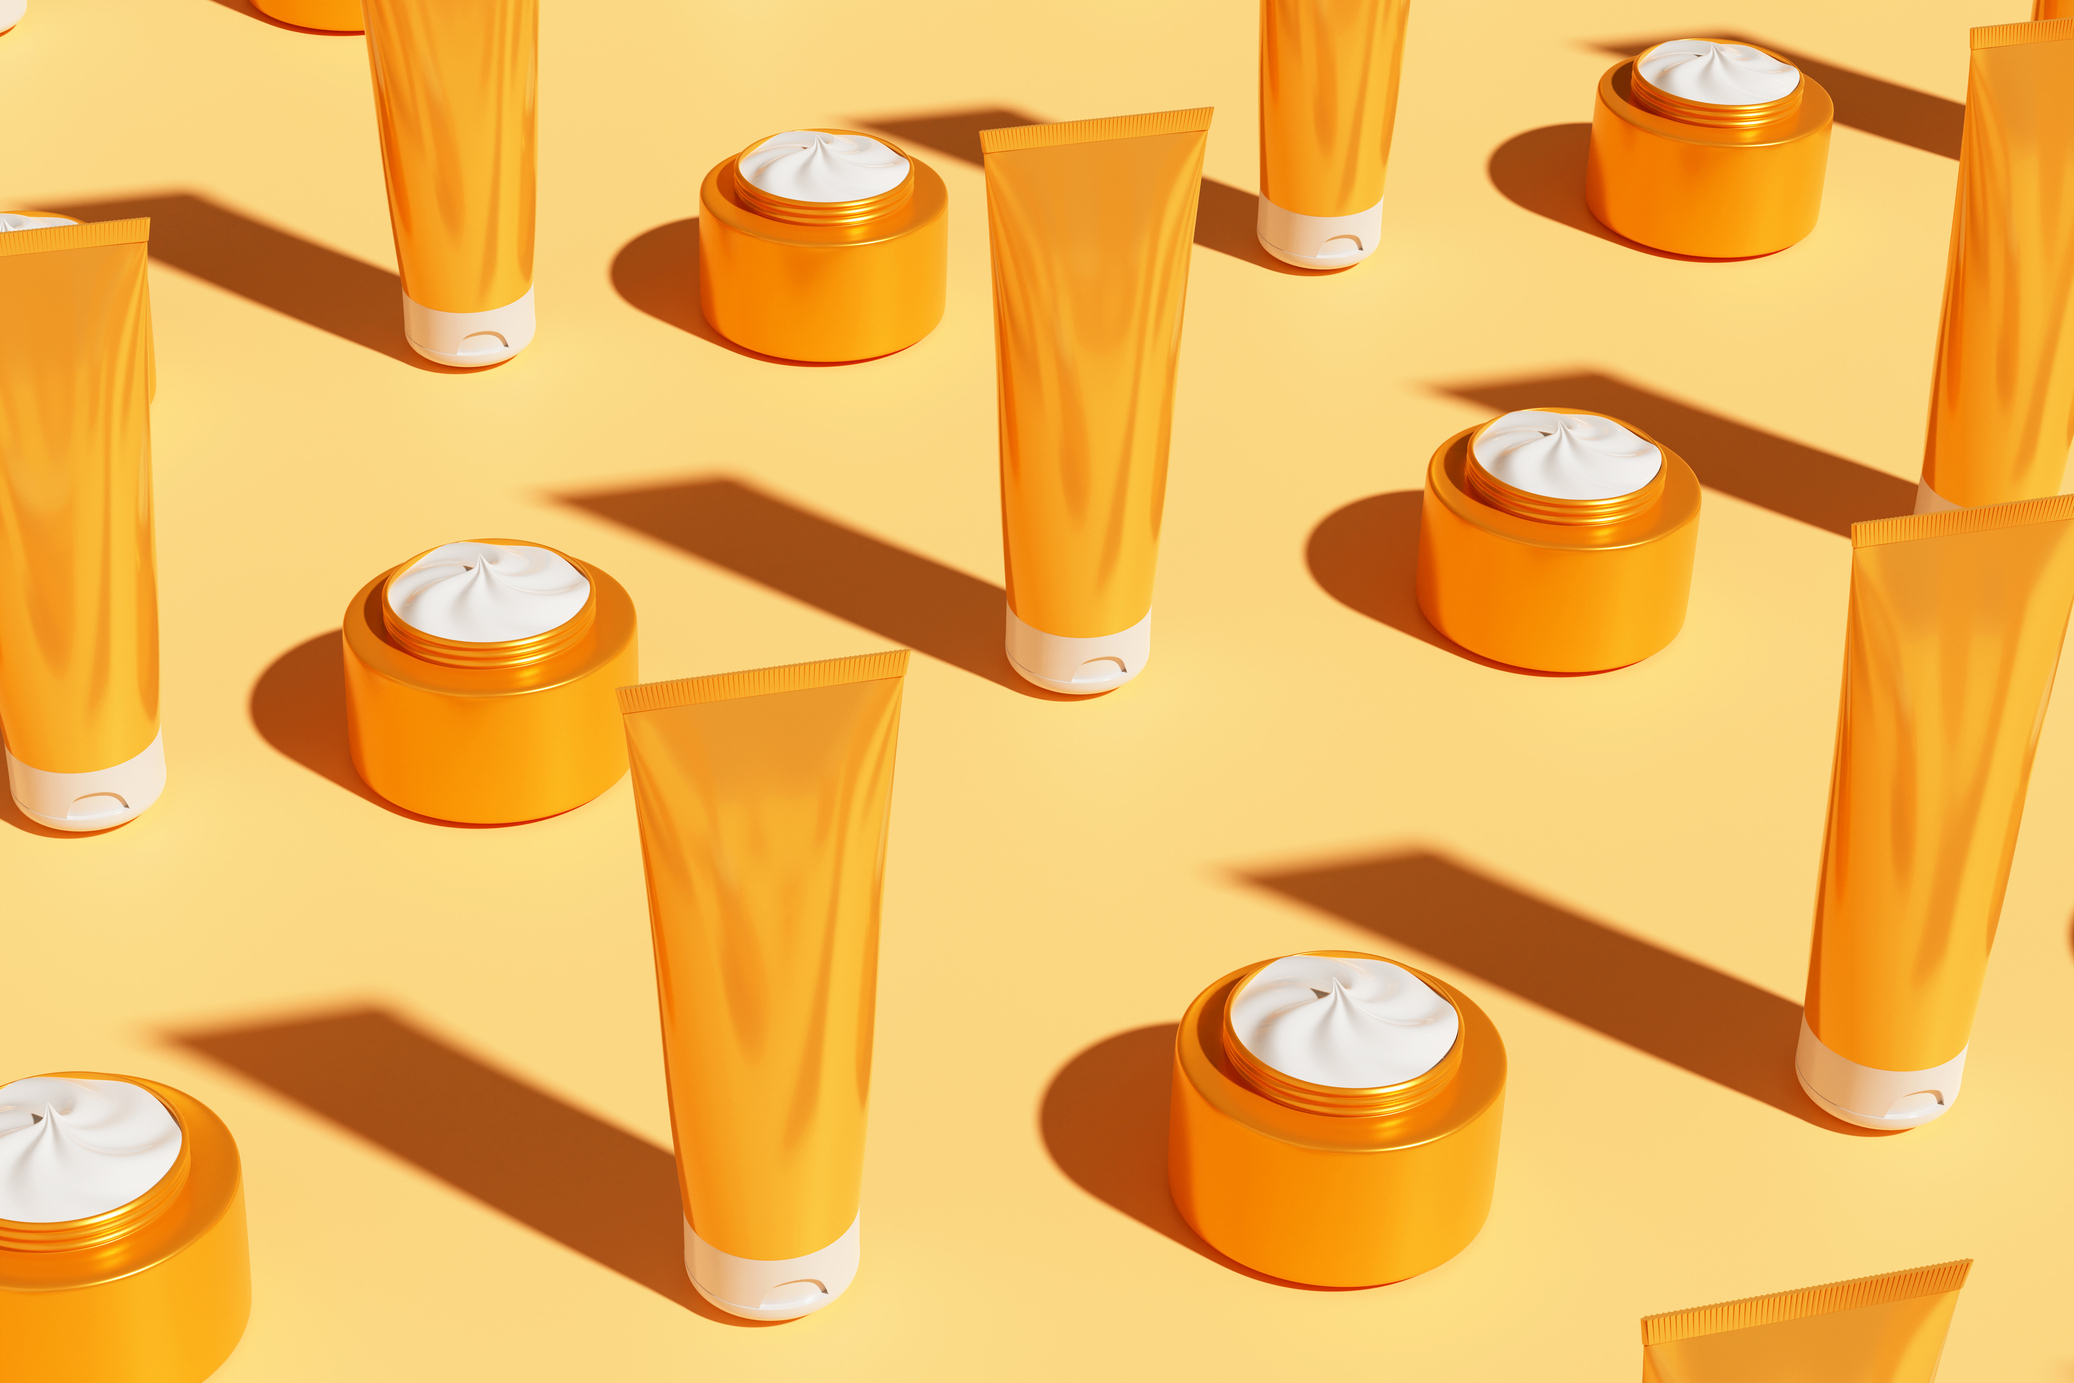 Other countries have better sunscreens. Here’s why we can’t get them in the U.S.